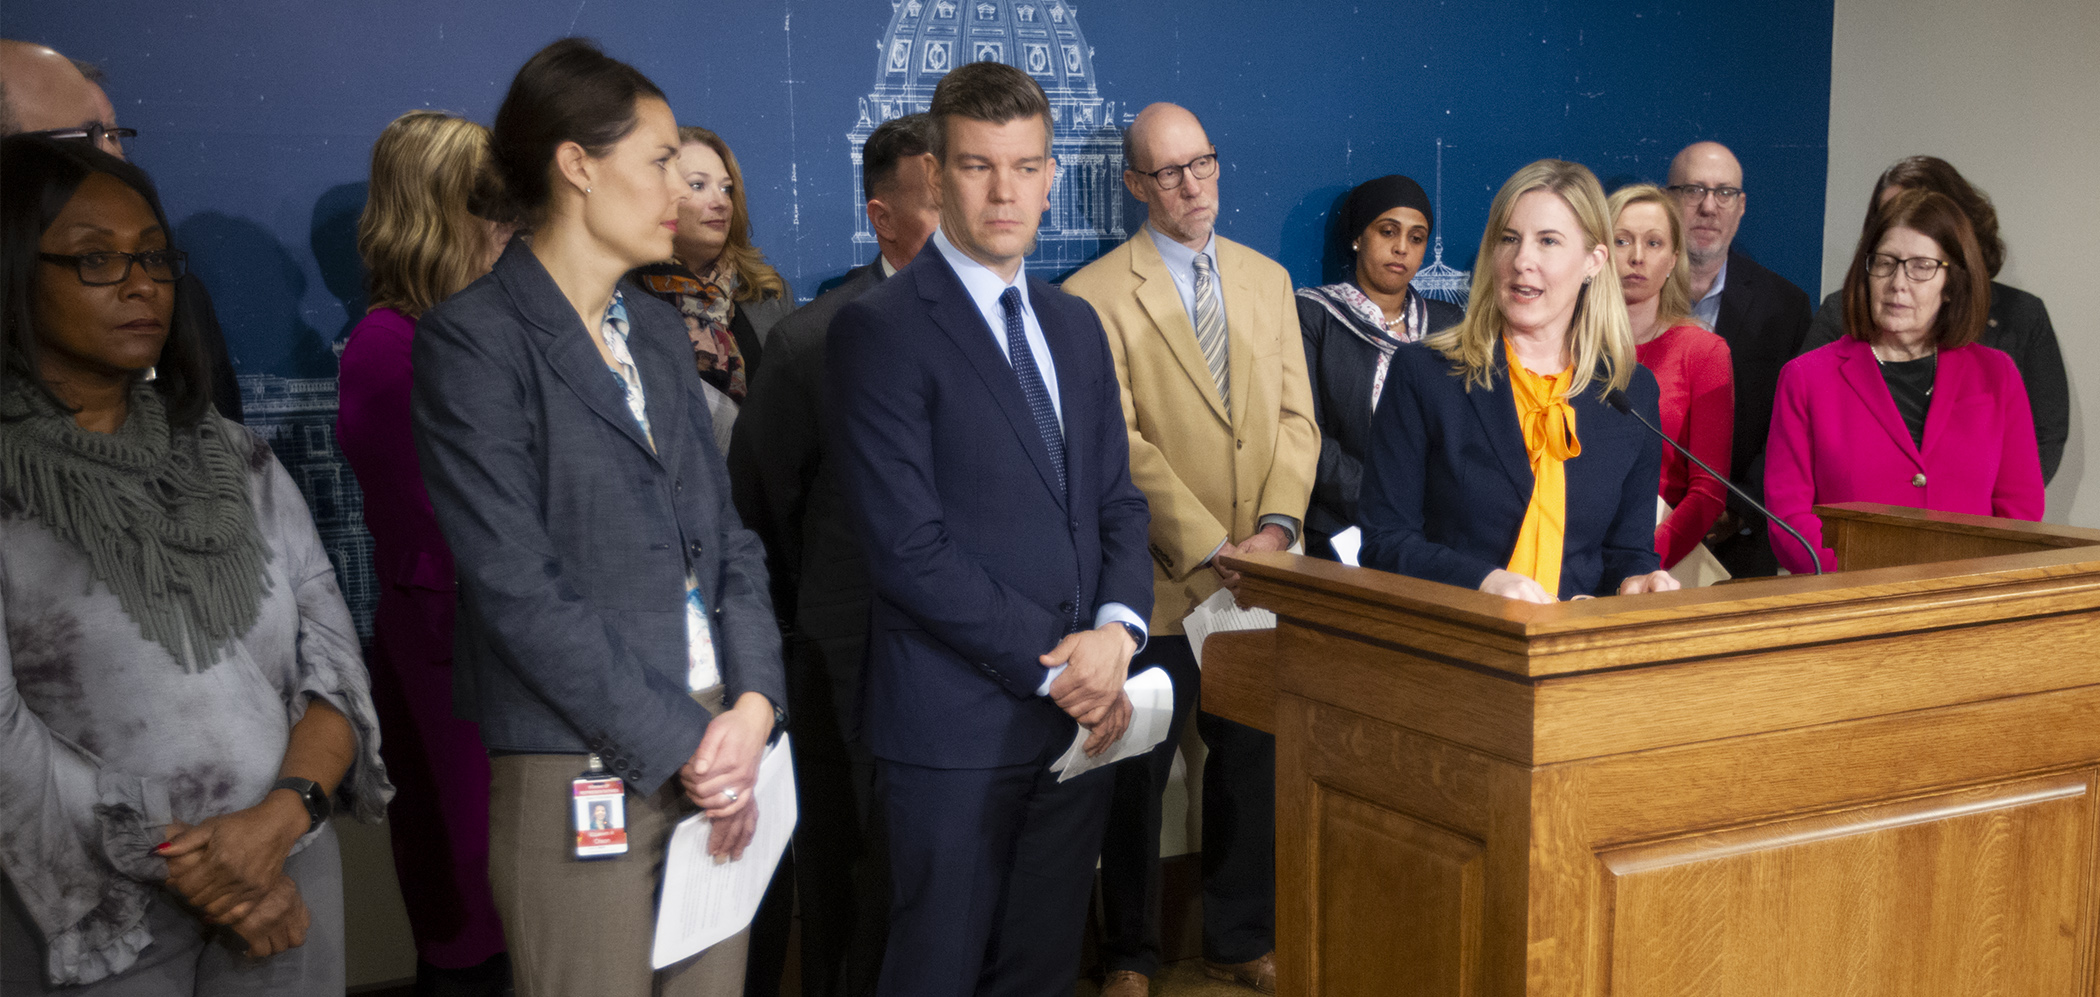 Surrounded by members of her caucus, House Speaker Melissa Hortman speaks during the unveiling of the House DFL’s first 10 bills, the so-called “Minnesota Values Agenda,” during a Jan. 9 press conference. | Photo by Paul Battaglia